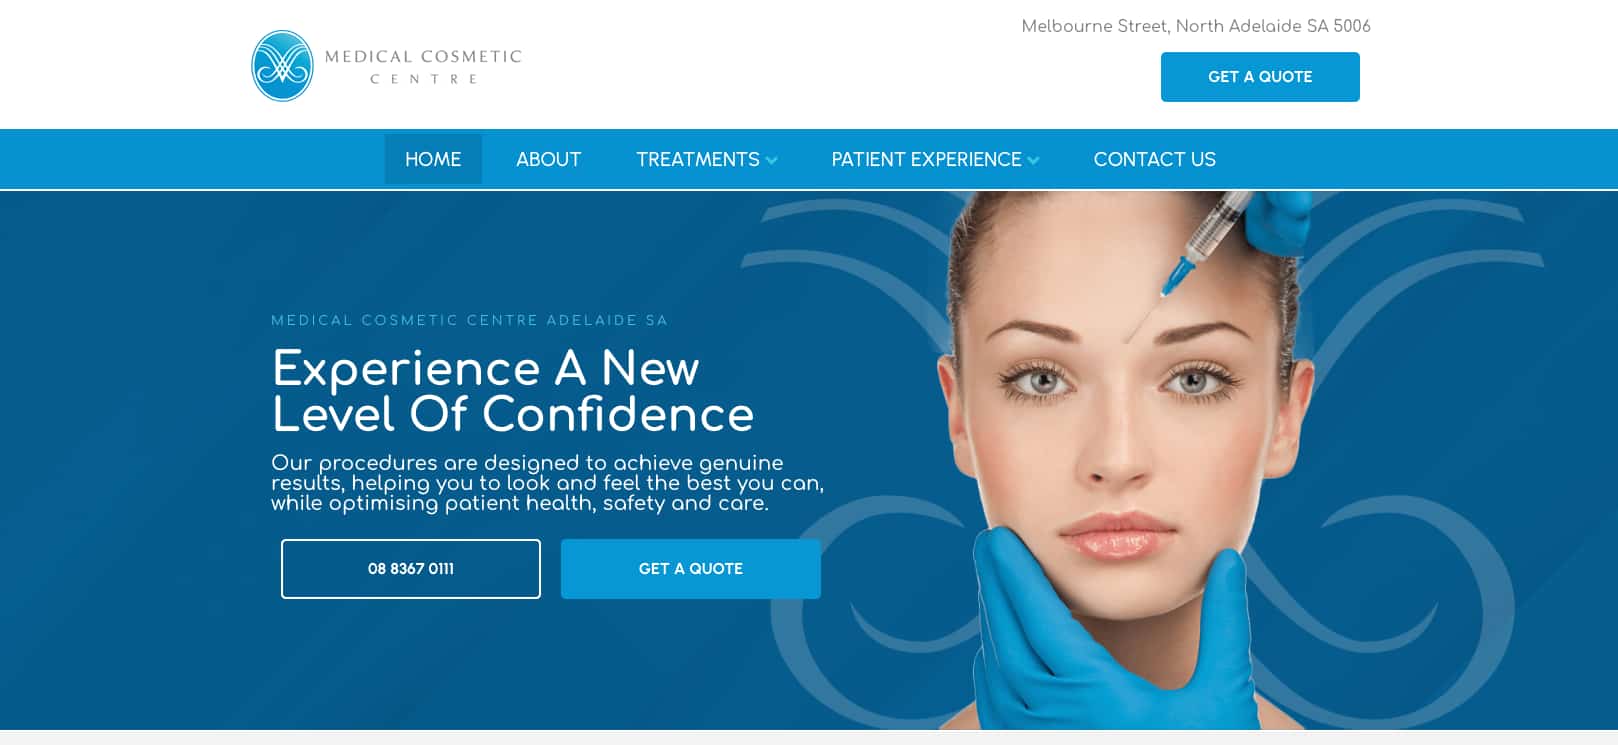 Medical Cosmetic Centre